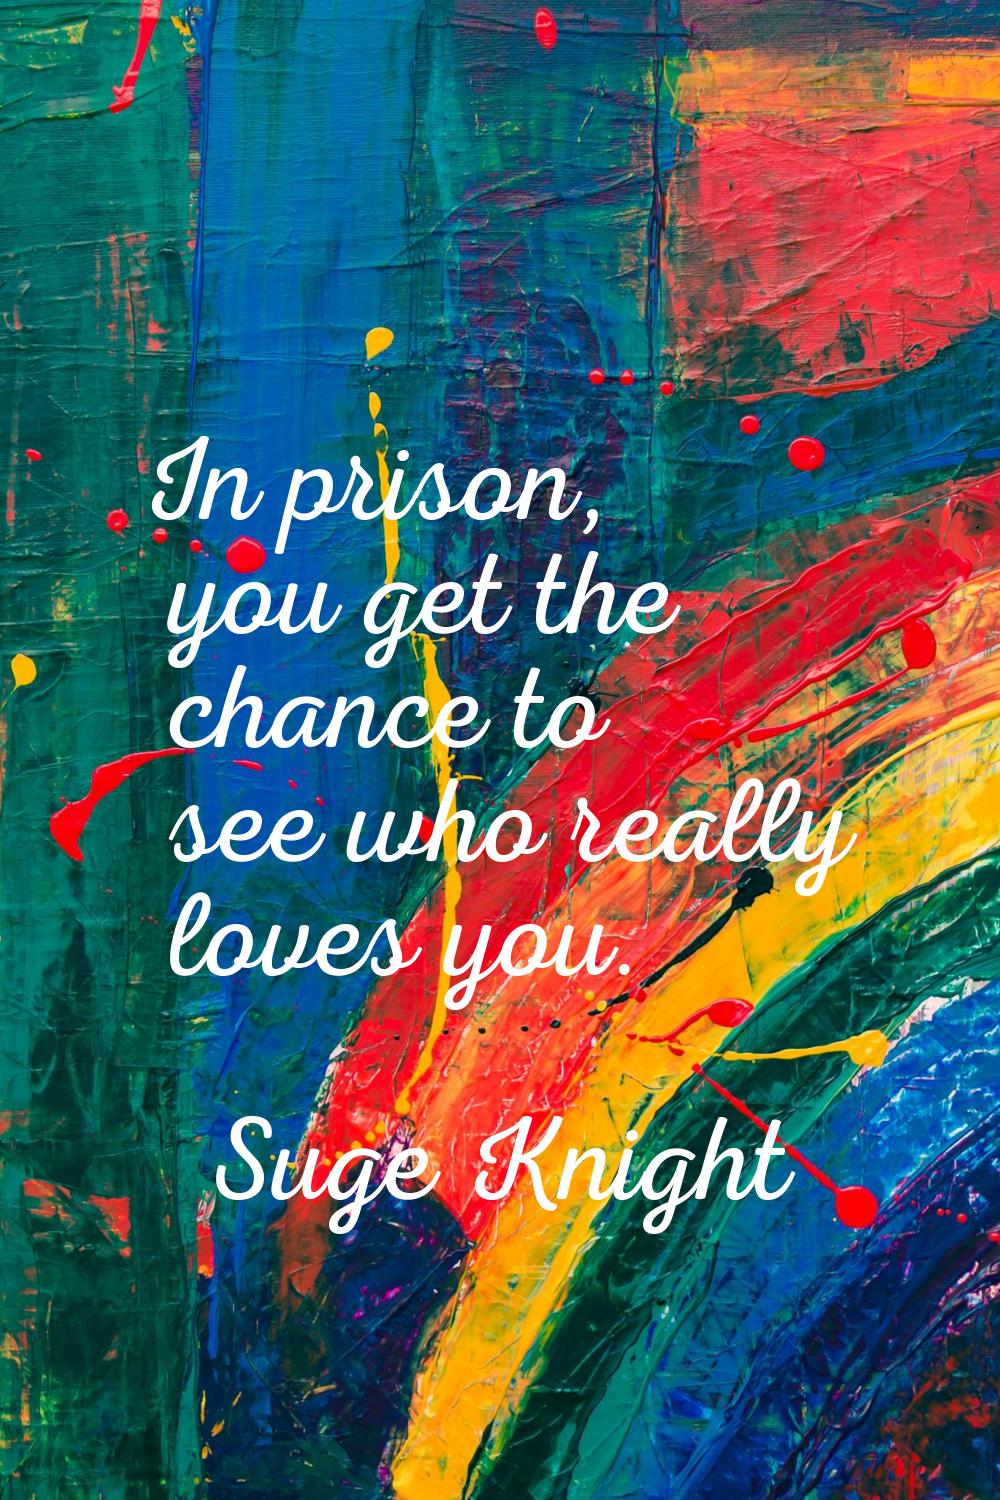 In prison, you get the chance to see who really loves you.